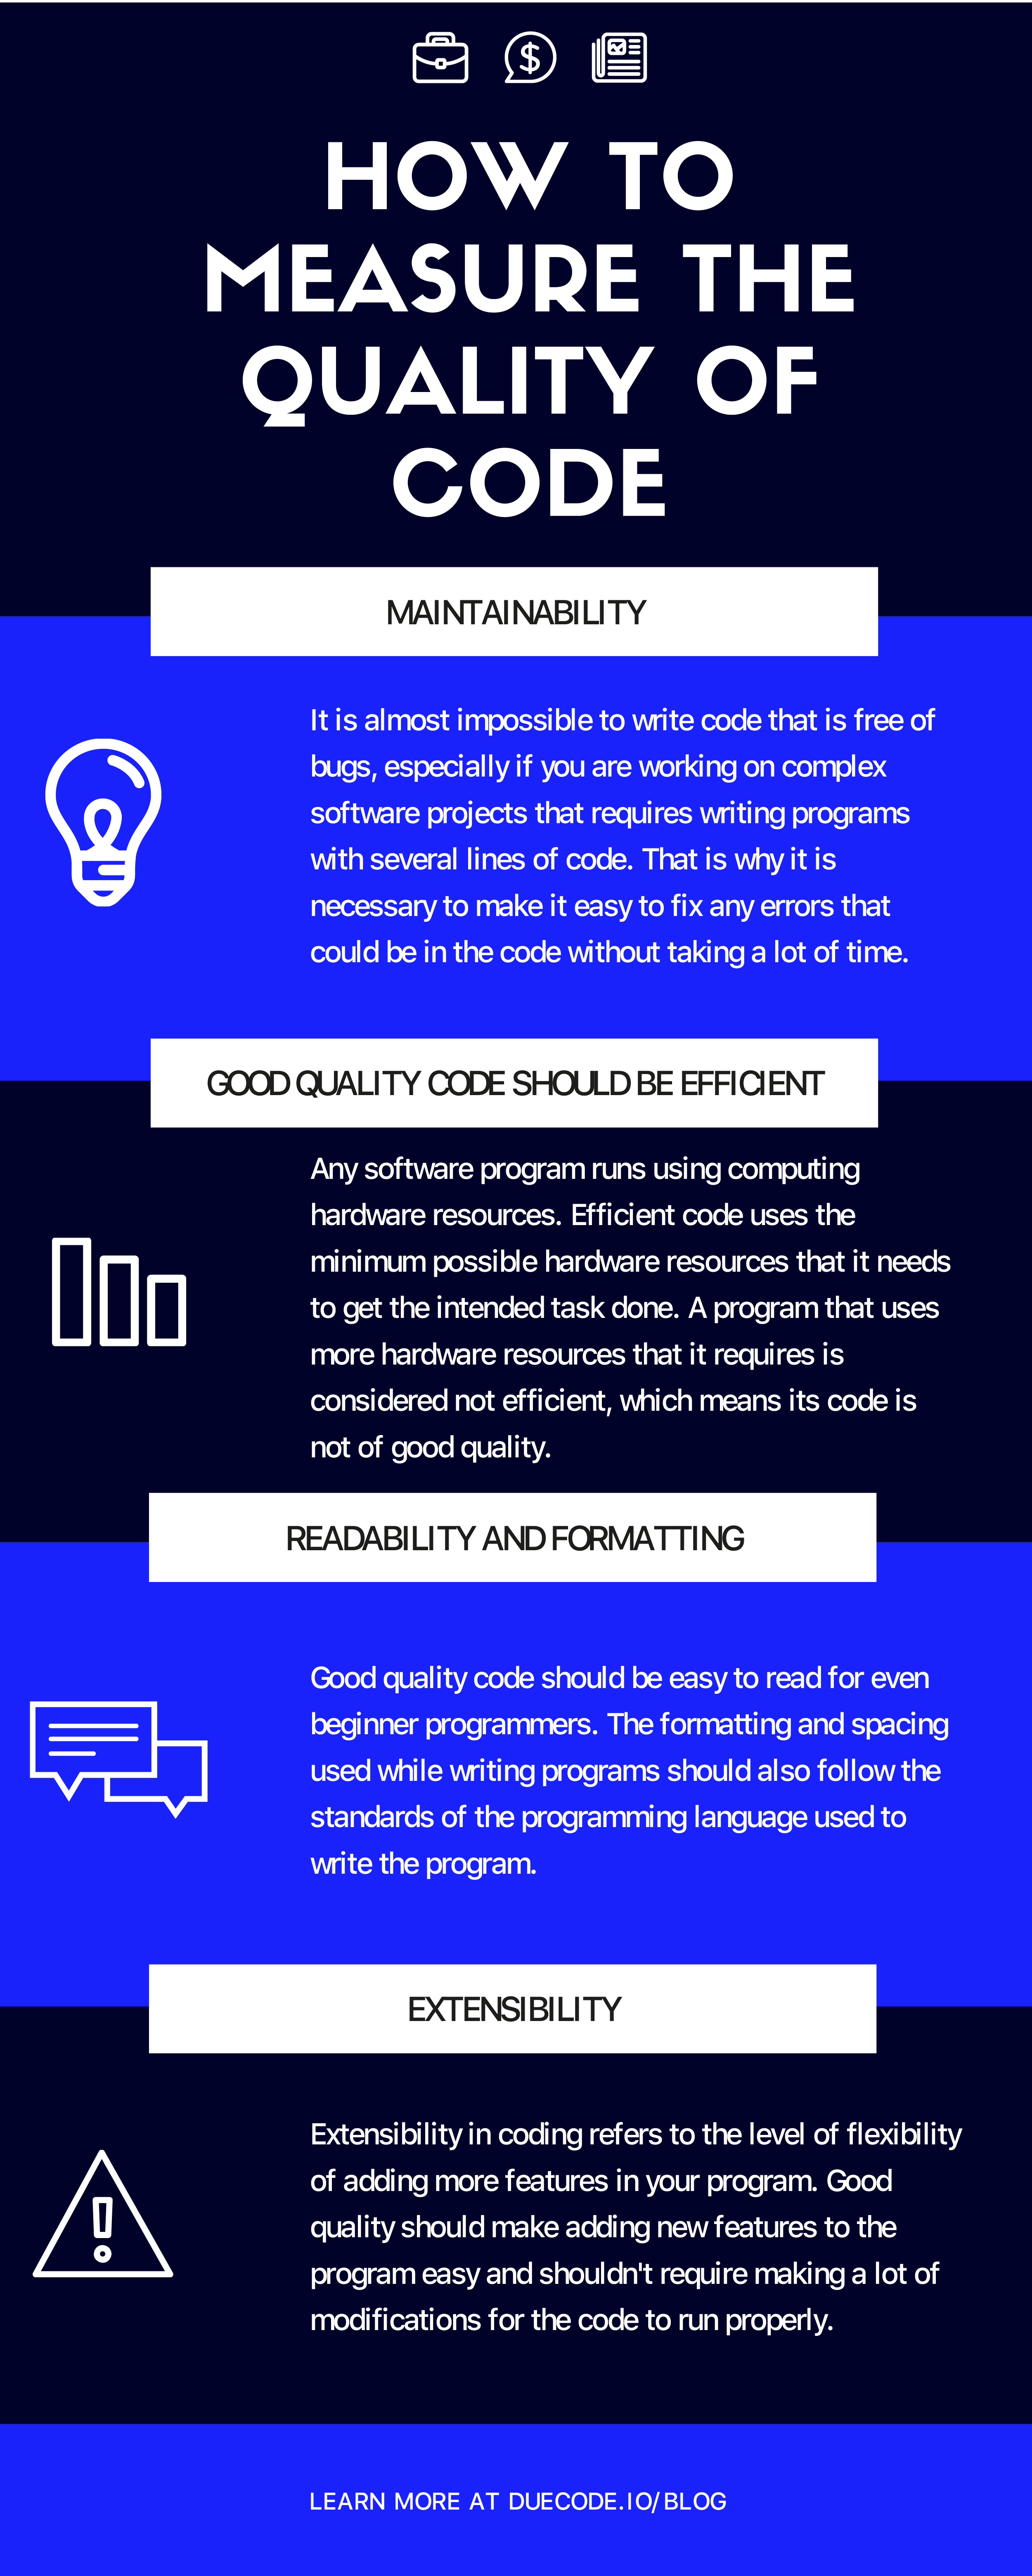 >How To Measure Code Quality Infographic